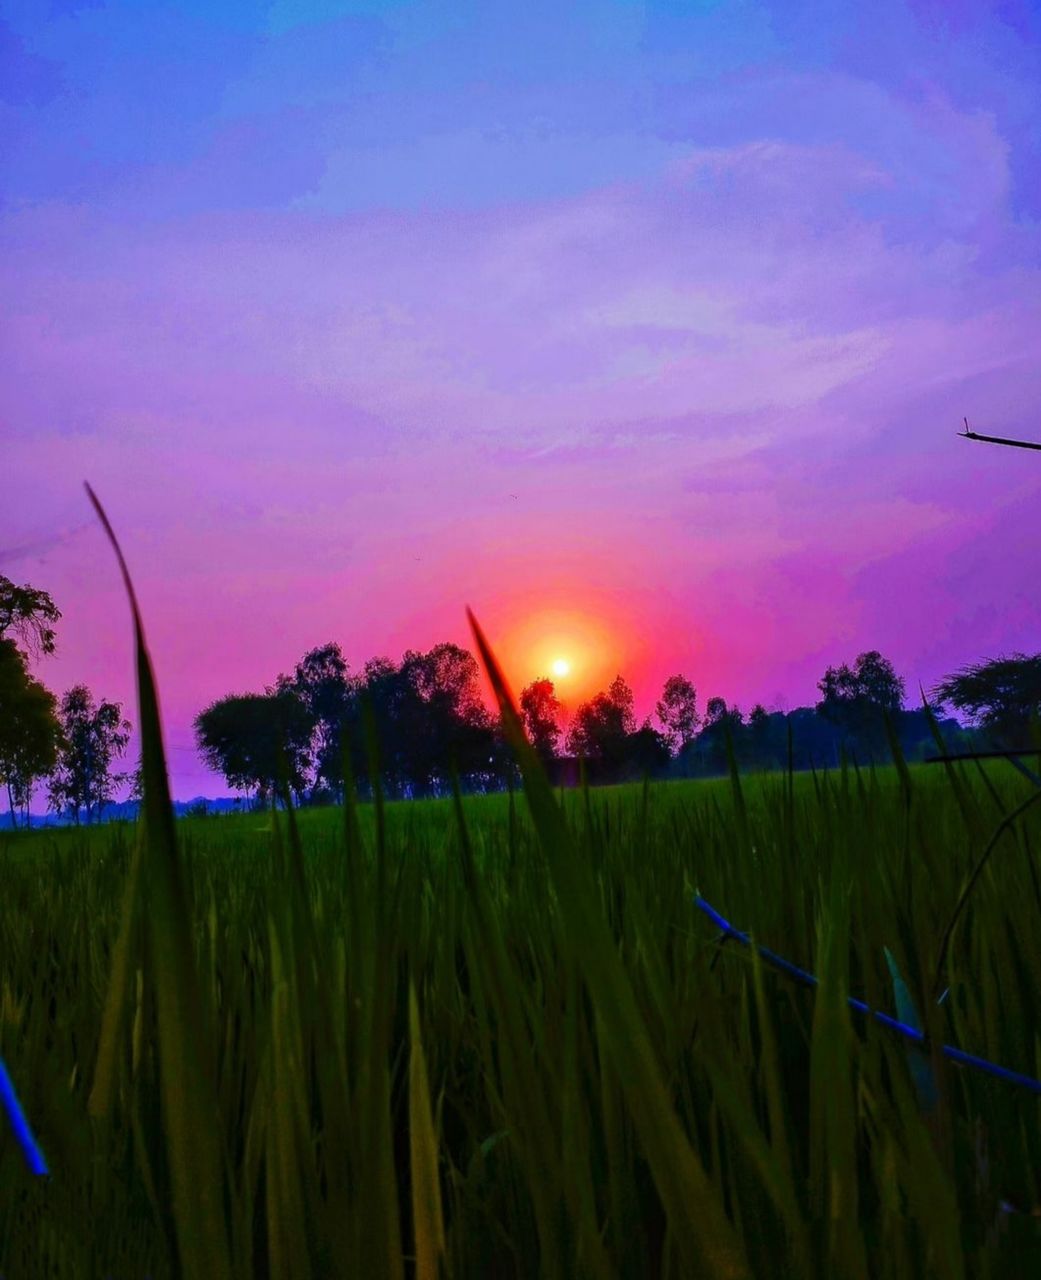 plant, sky, landscape, sunset, field, nature, beauty in nature, land, agriculture, growth, environment, rural scene, scenics - nature, crop, tranquility, cloud, tranquil scene, horizon, no people, cereal plant, tree, dusk, grass, sunlight, outdoors, purple, idyllic, farm, sun, evening, green, paddy field, rice, twilight, meadow, blue, flower, rice paddy, grassland, food